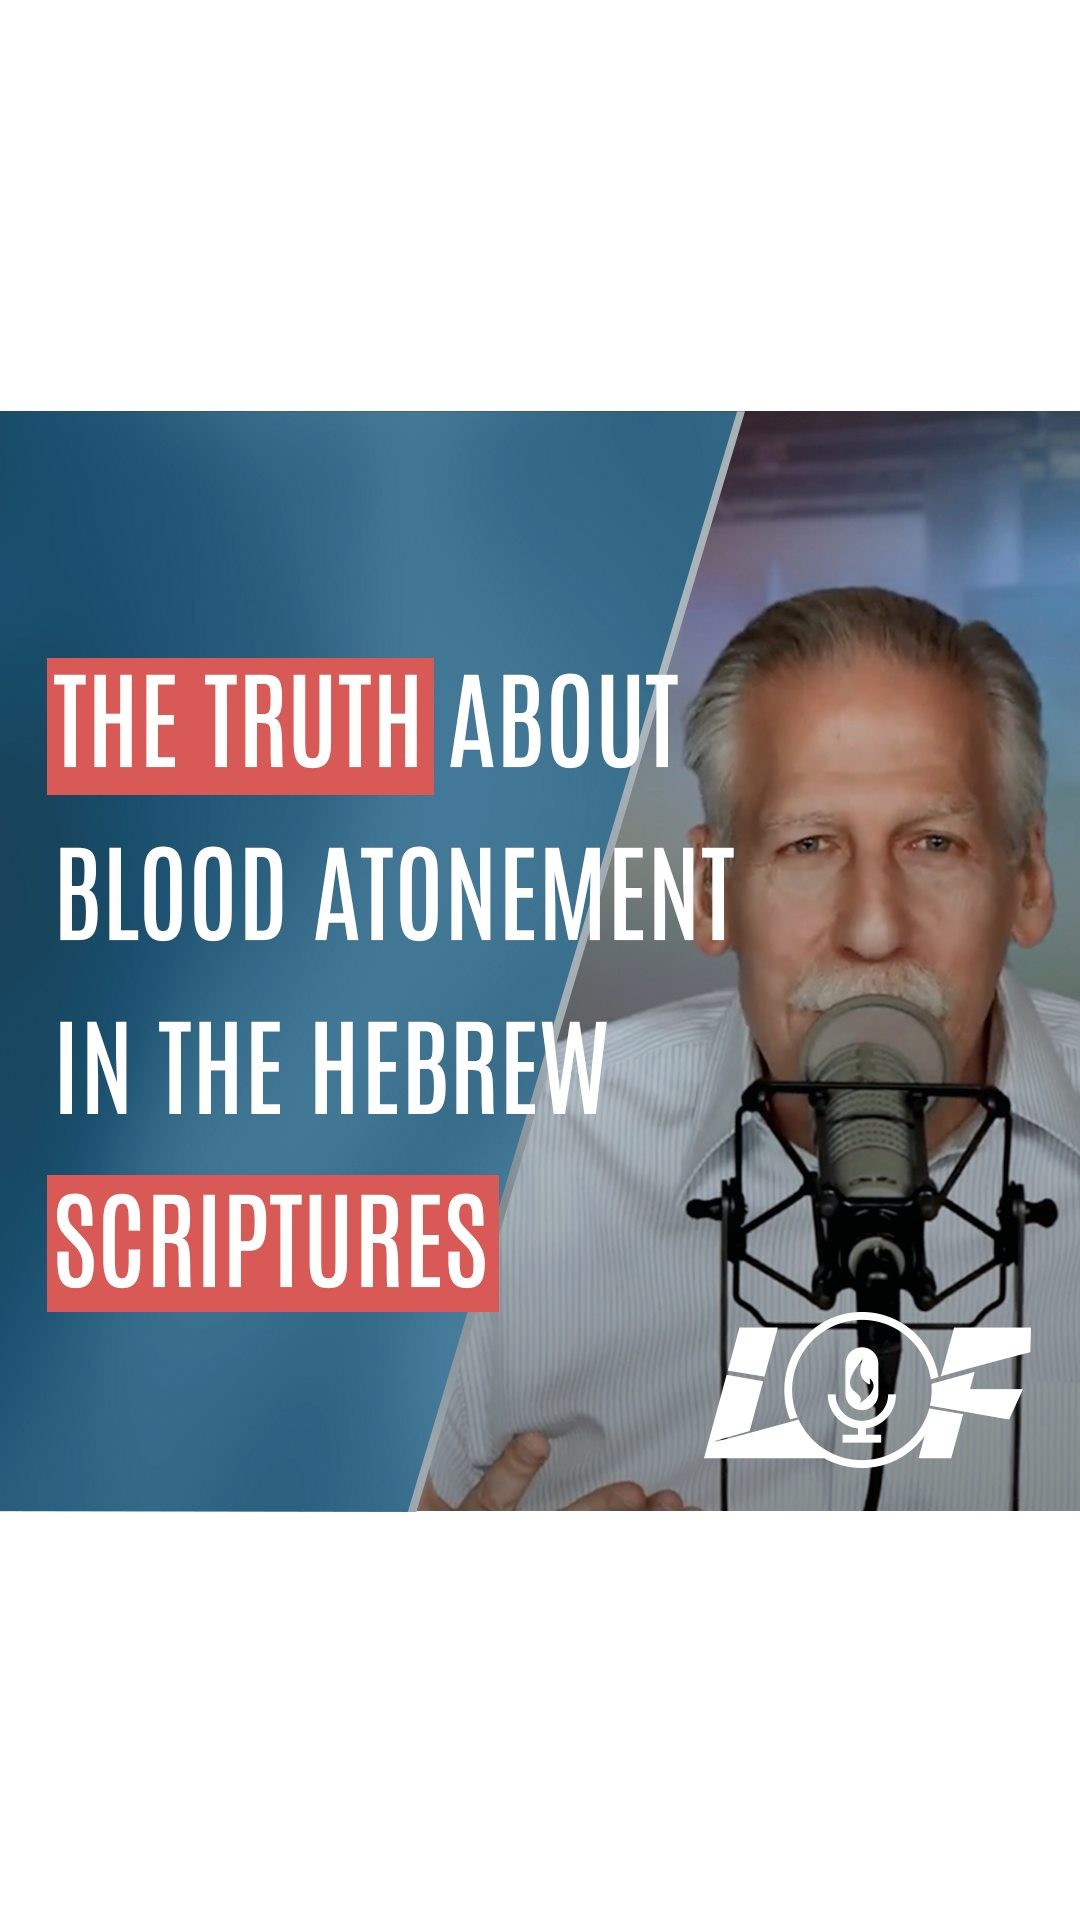 The Truth About Blood Atonement in the Hebrew ScripturesIs atonement possible without the shedding of blood? Did Solomon and the prophets provide instructions for how to be forgiven of sins once there was no temple and no sacrifices? Dr. Brown takes up these questions and more in the latest video in the Answering the Rabbis series, The Truth About Blood Atonement in the Hebrew Scriptures. LINK FOR FULL VIDEO IN BIO#askdrbrown #drmichaelbrown #newvideo #watchnow #YouTube #channel #watching #political